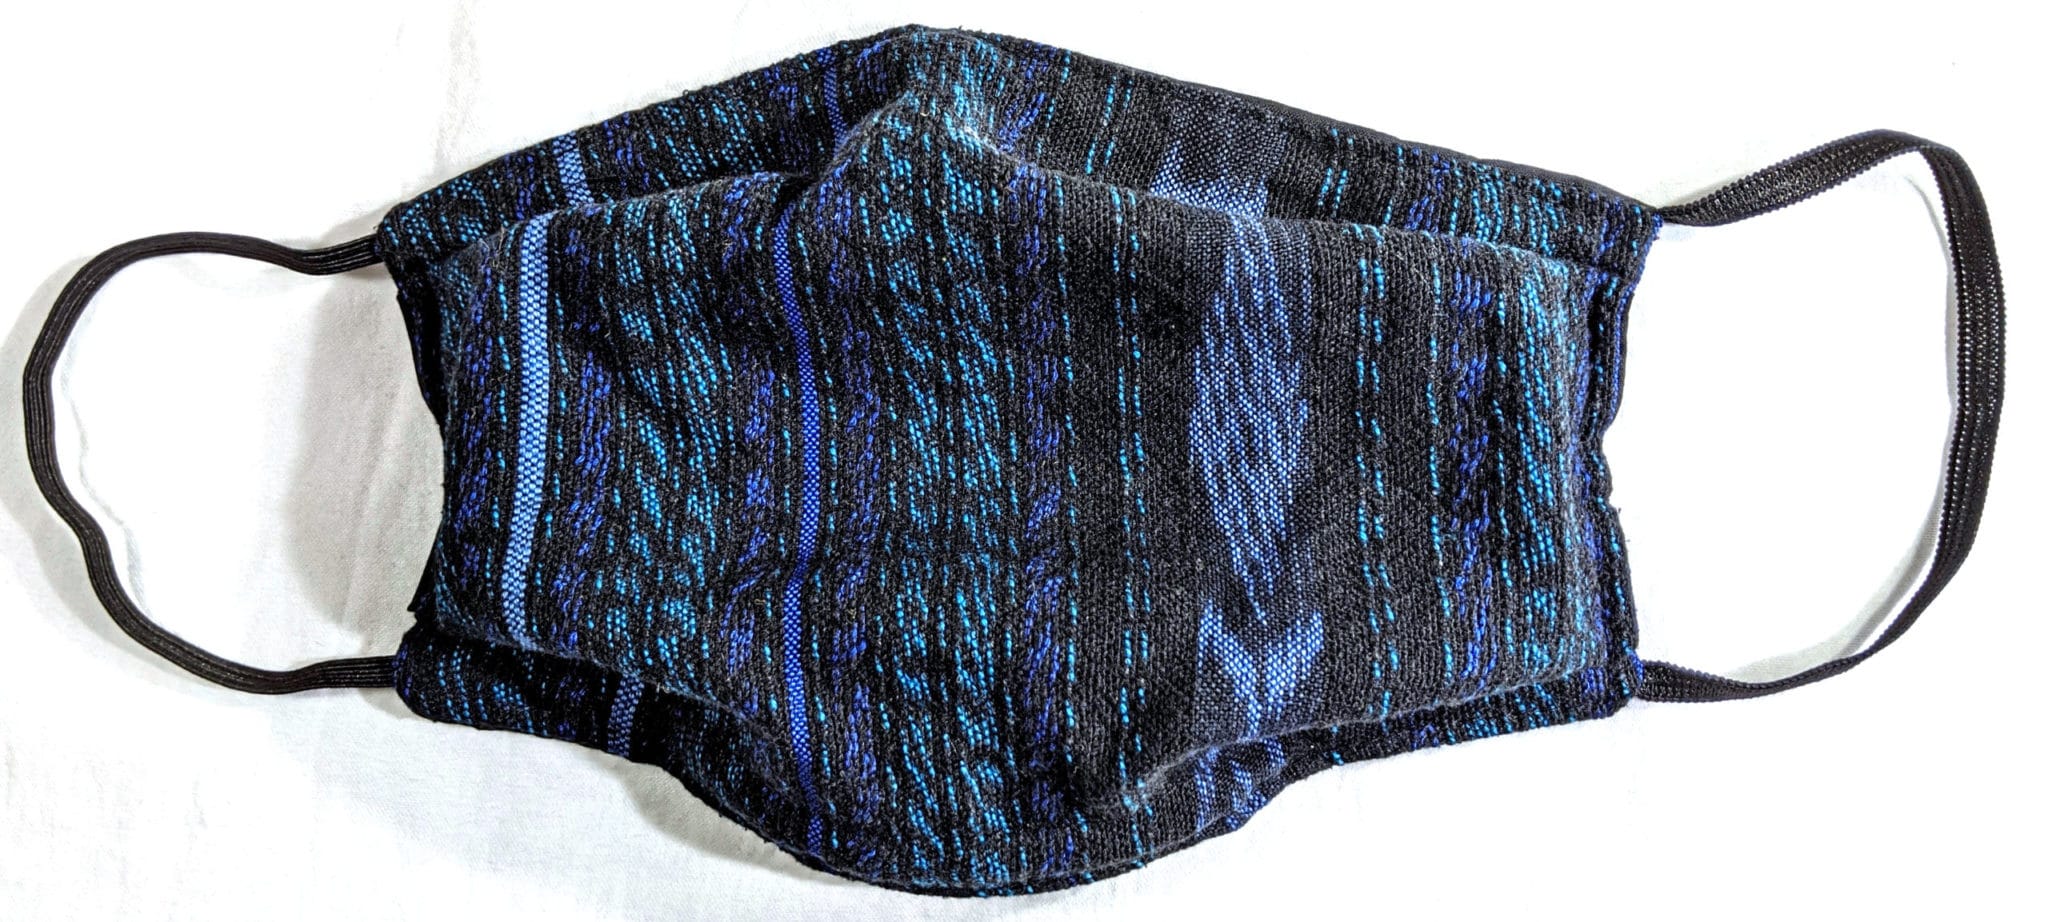 Sapphire, Emerald and Black Jaspe Handwoven Pleated Cotton Mask